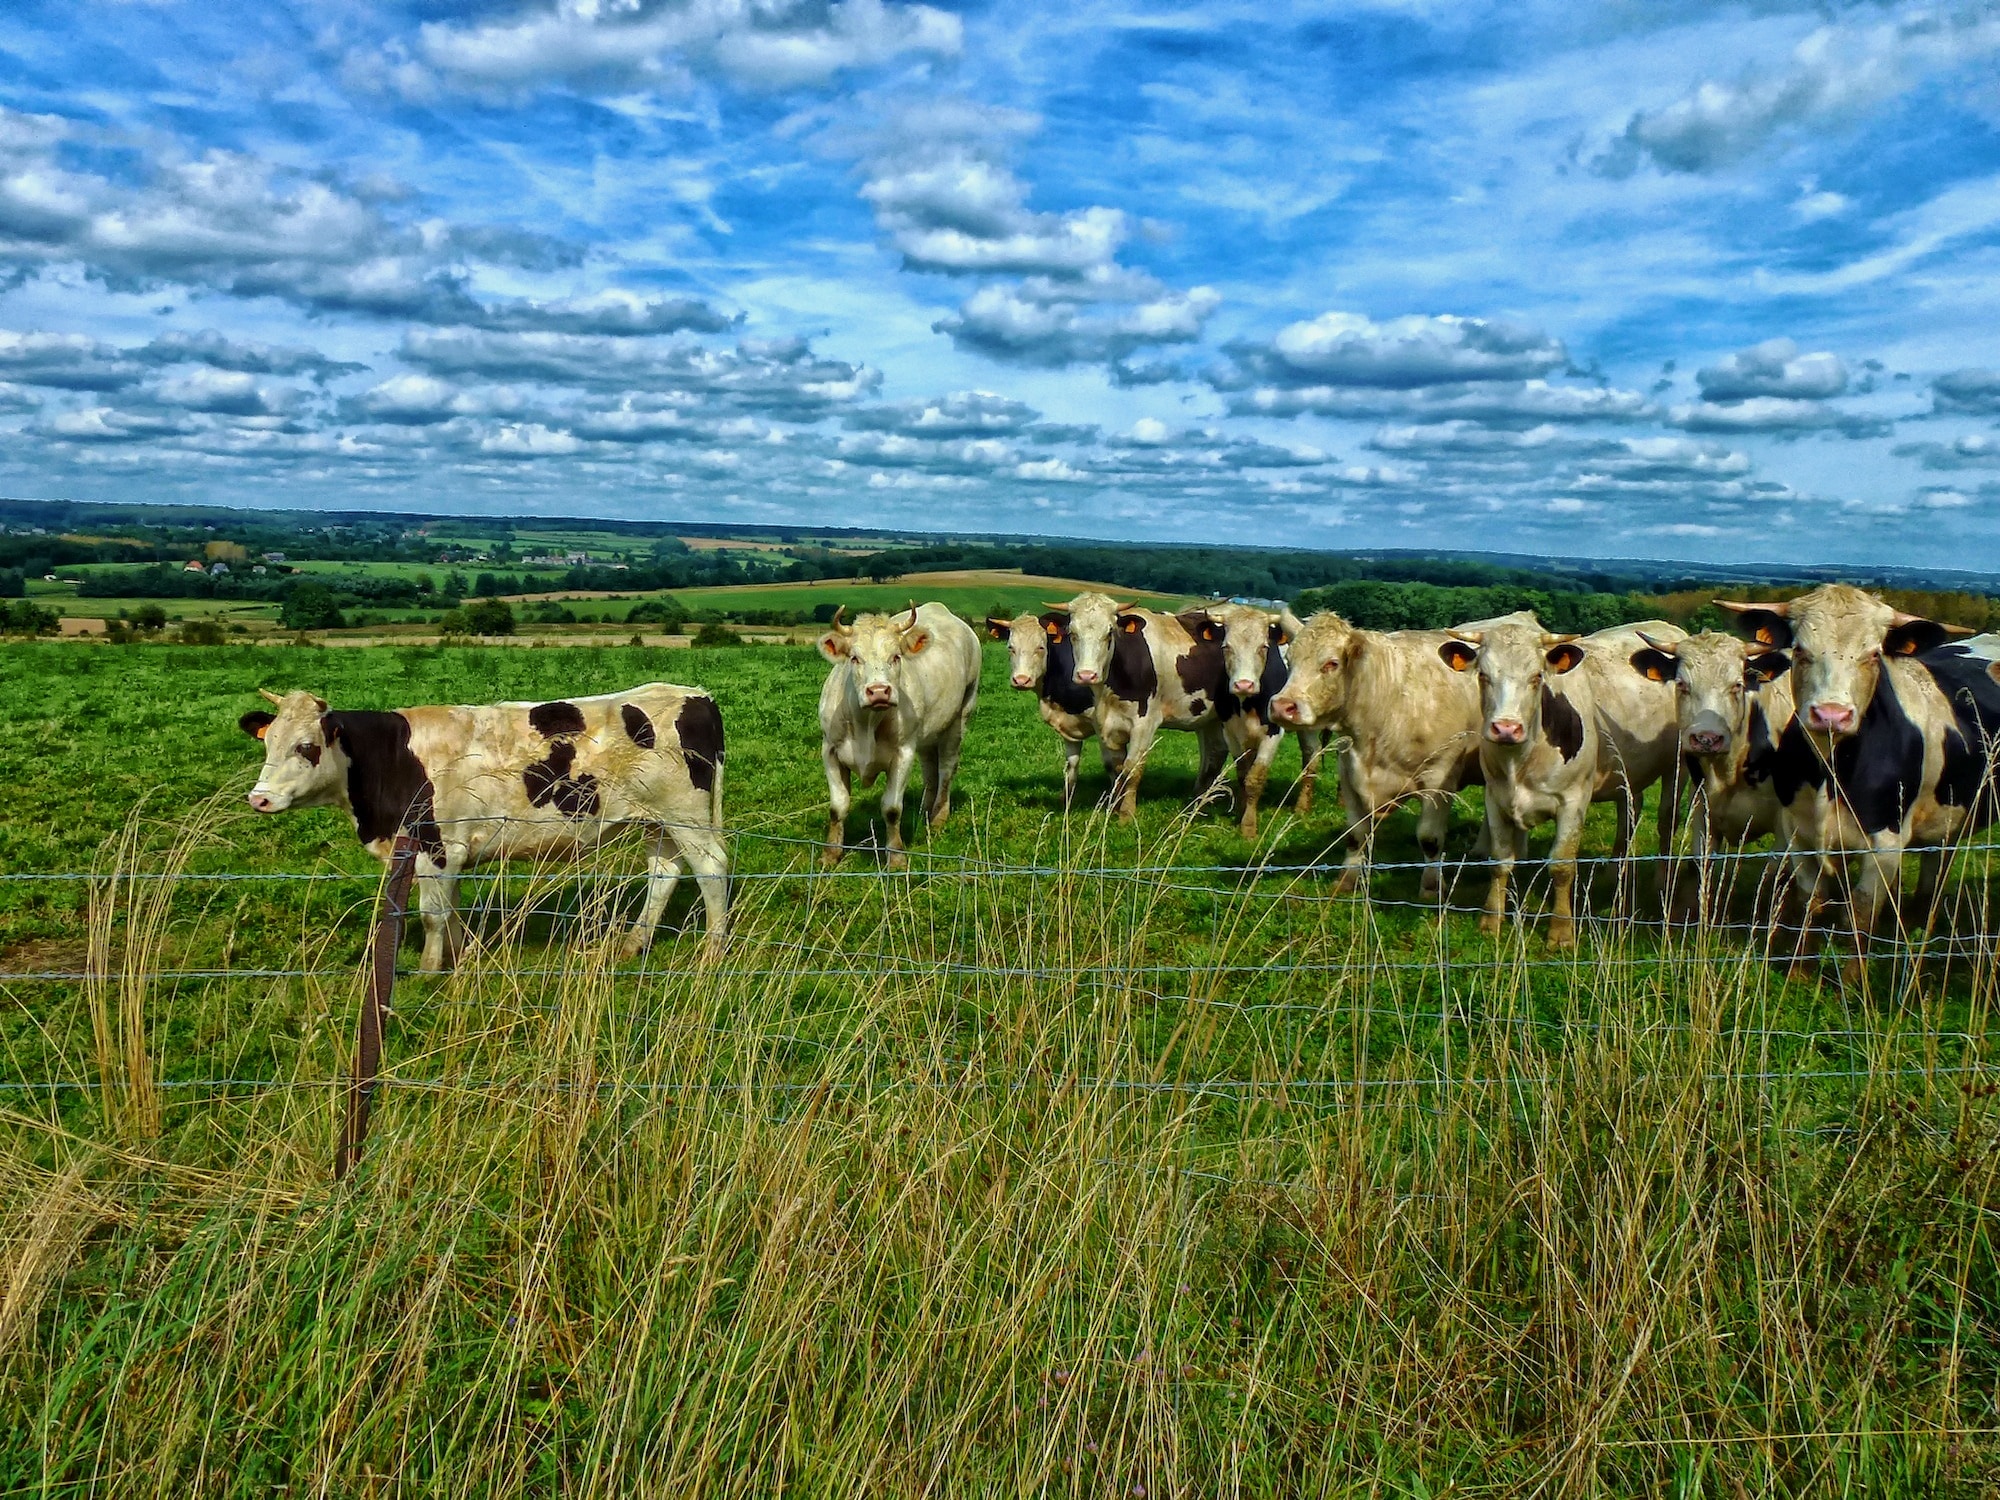 Meadow, Pasture, Cattle, France, Cows, grass, animal themes